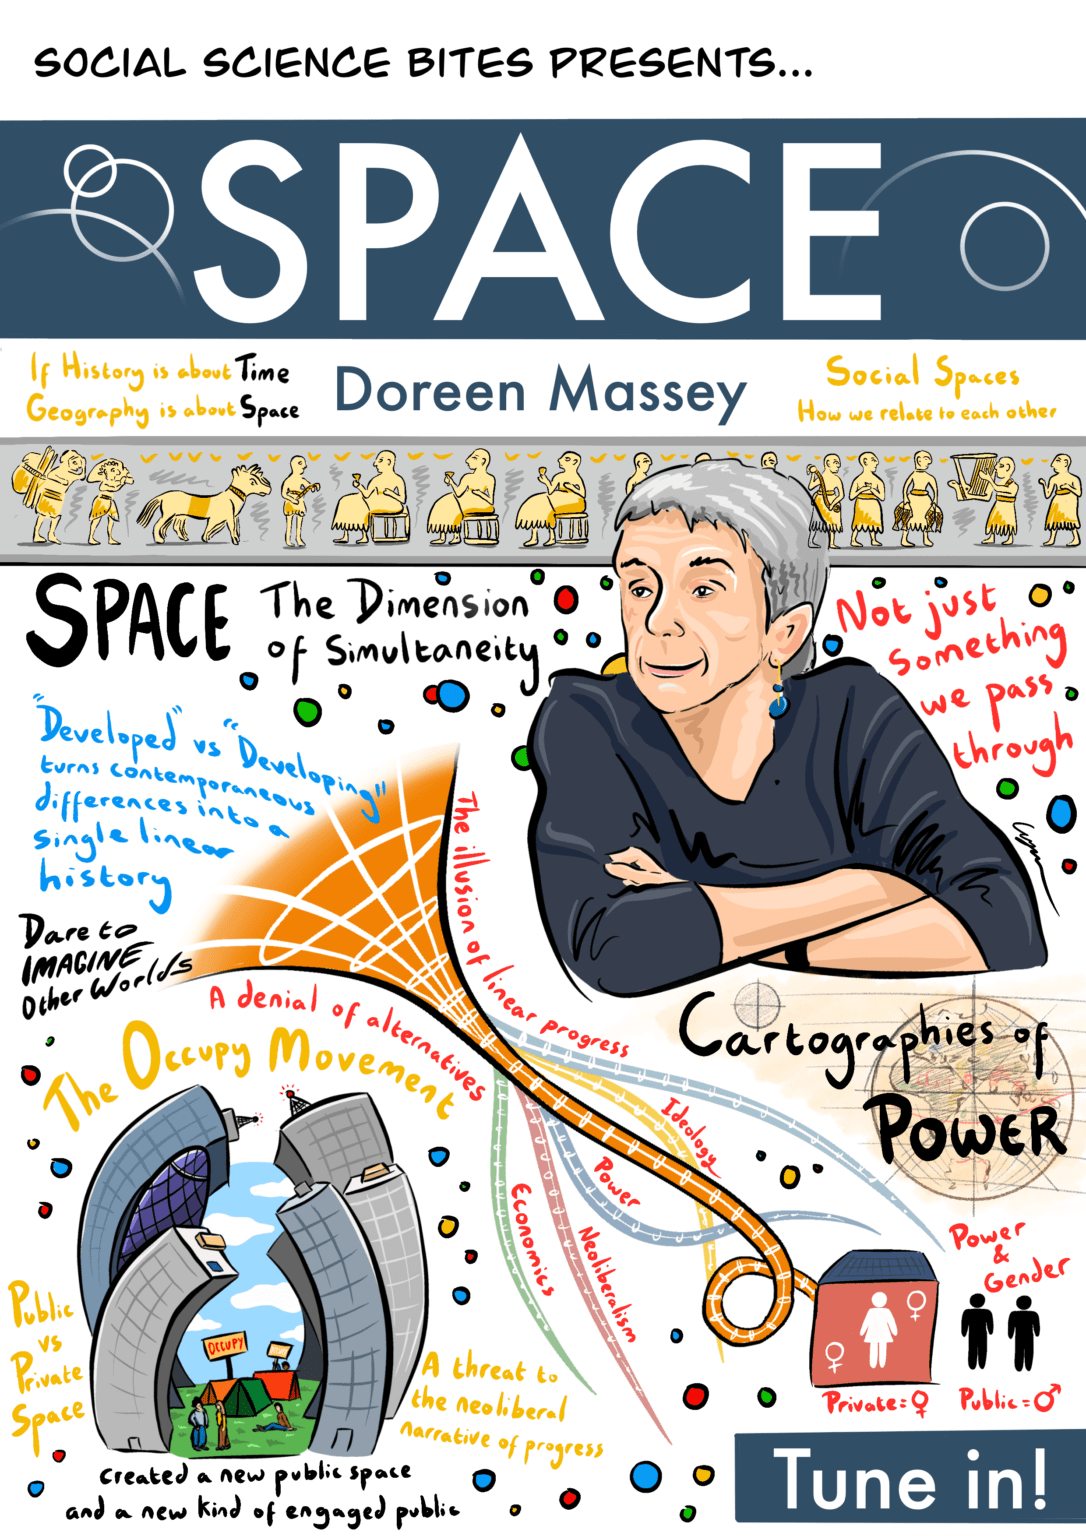 doreen massey opinion time space compression